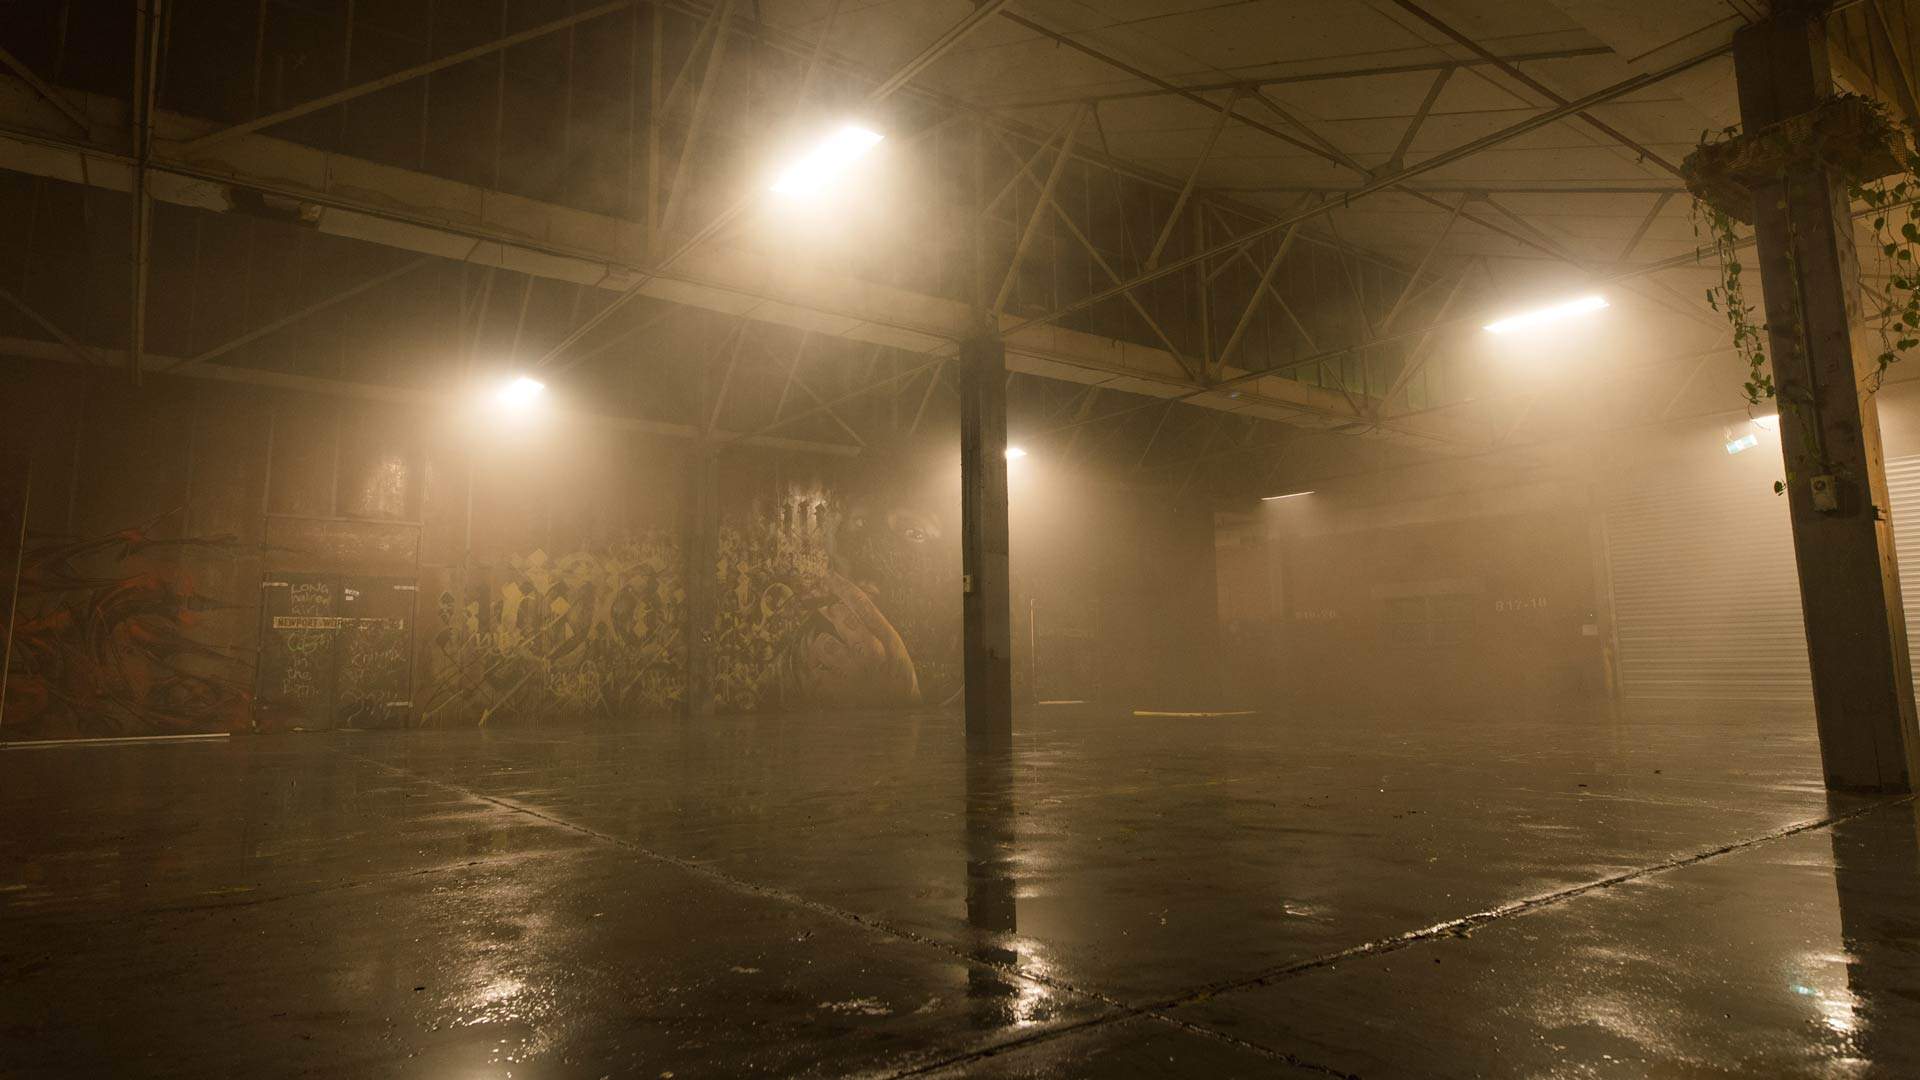 Melbourne's New Street Art Festival Can't Do Tomorrow Will Take Over an Underground Warehouse